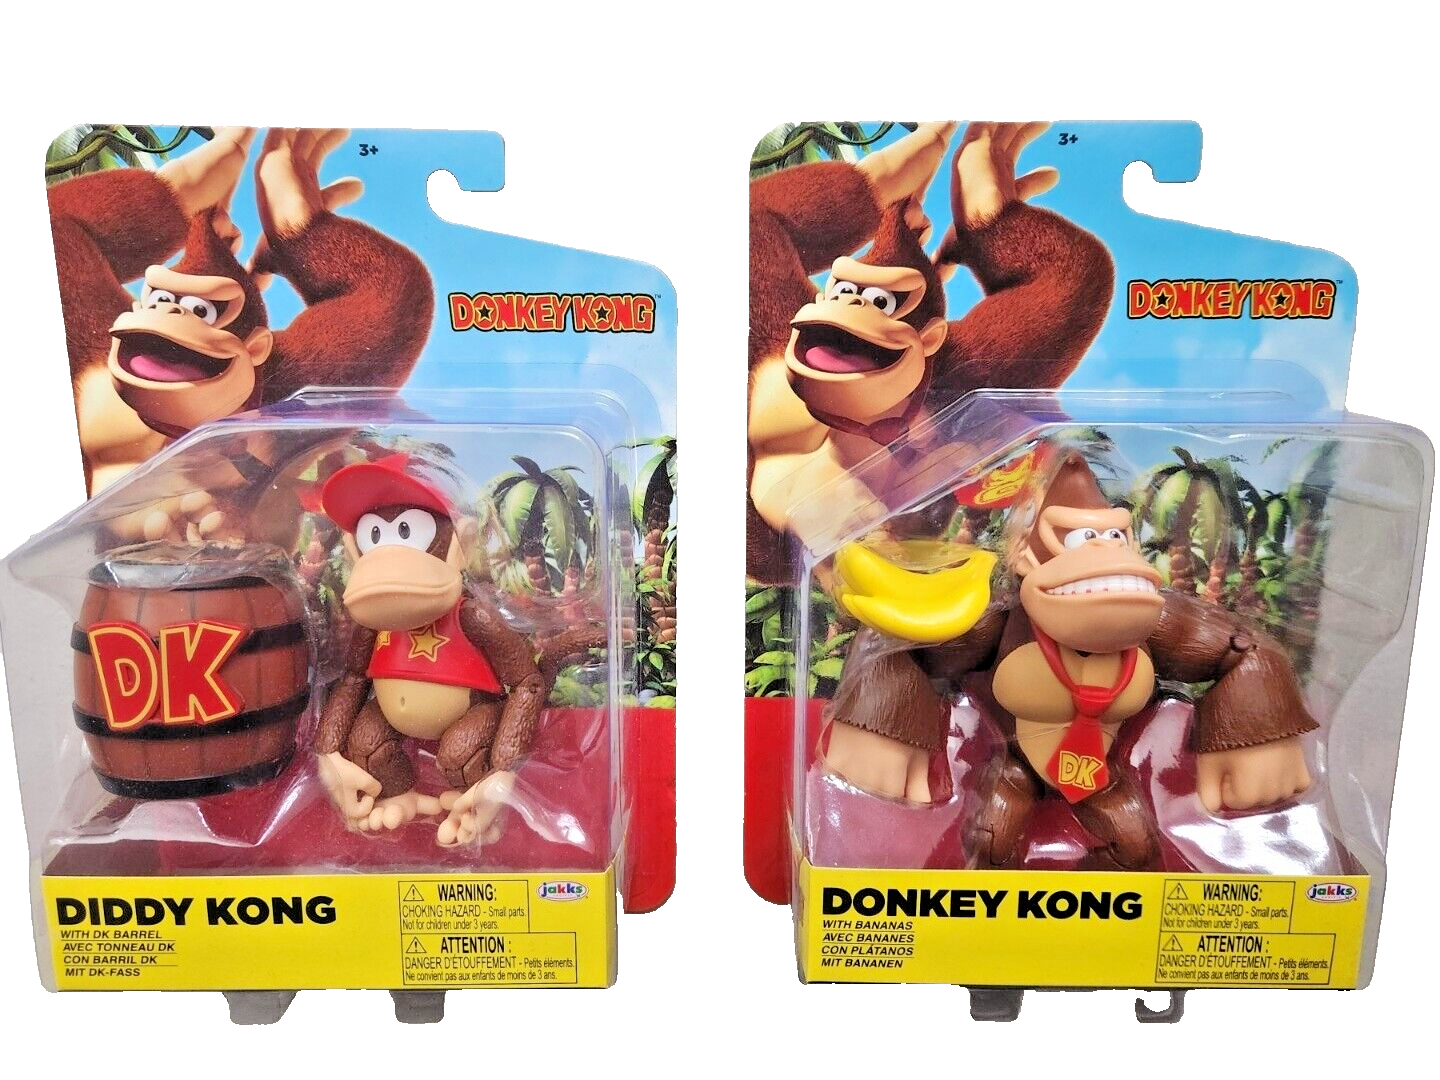 Donkey Kong with Bananas + Diddy Kong  with Barrel 4" Nintendo Jakks Pacific JAKKS Pacific JAKKS Pacific 4 Inch World Of Nintendo Donkey & Diddy Kong